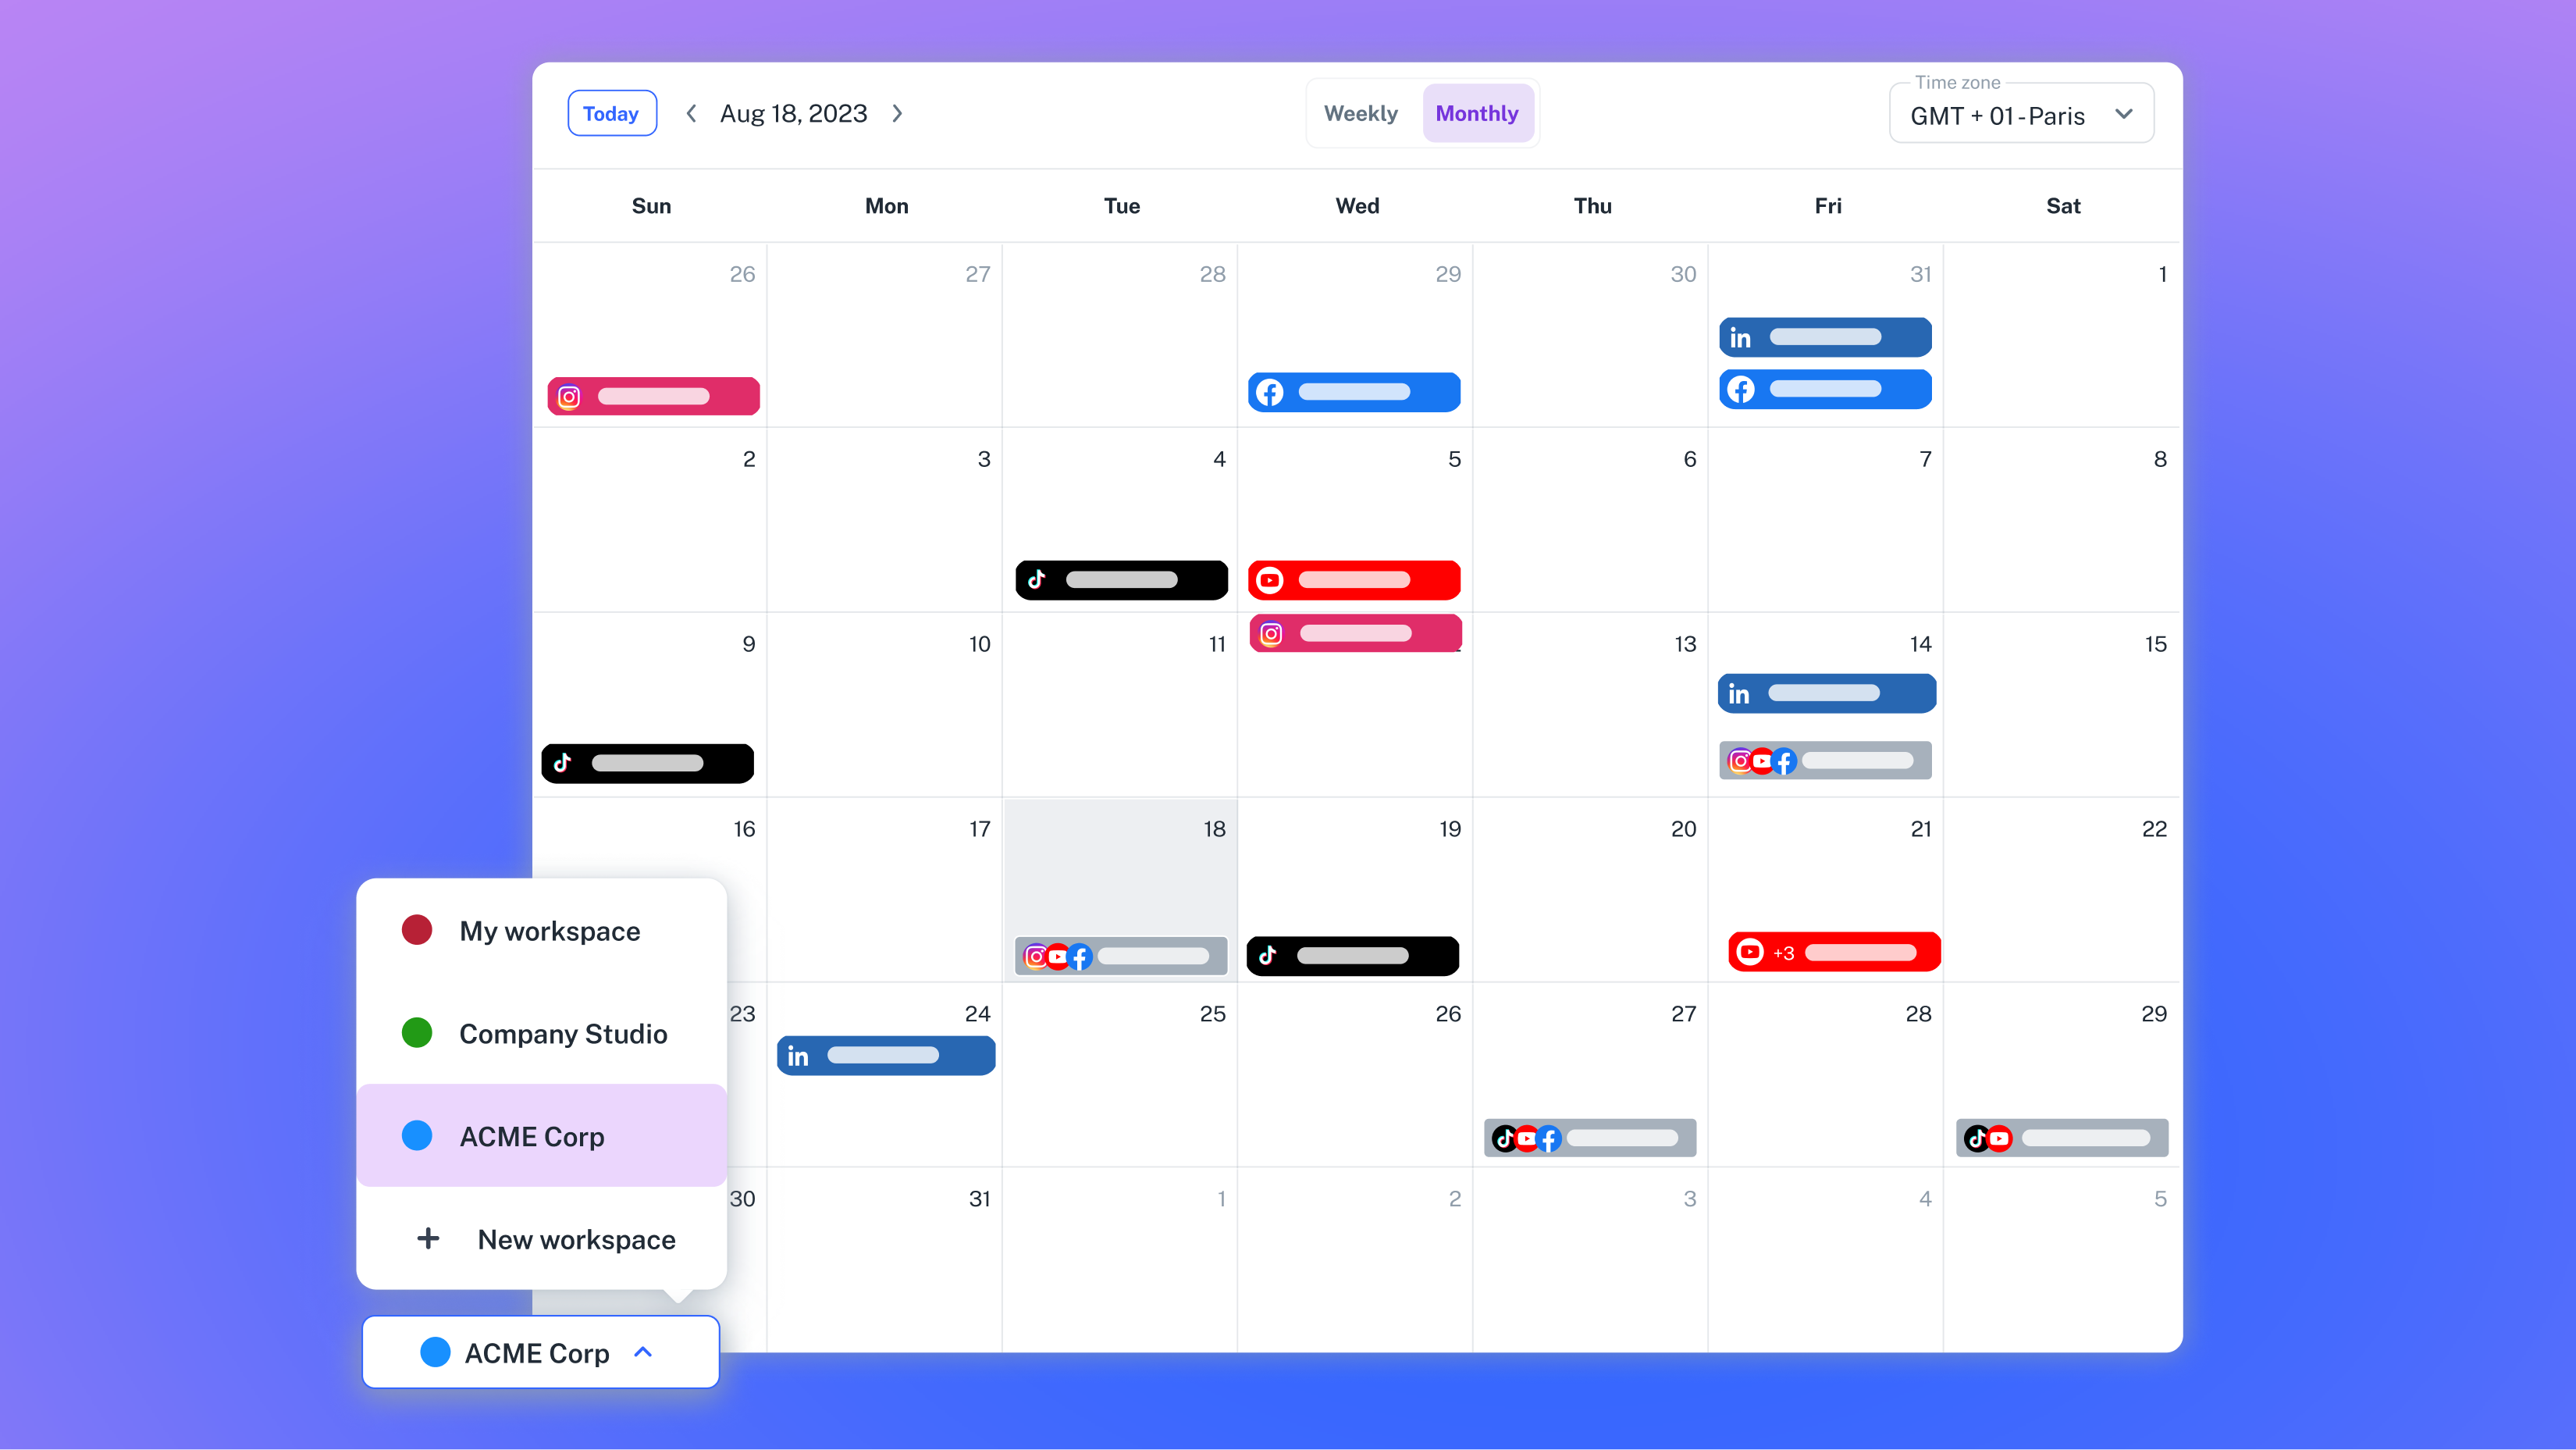 Content Calendar to visualize all your drafts and scheduled posts